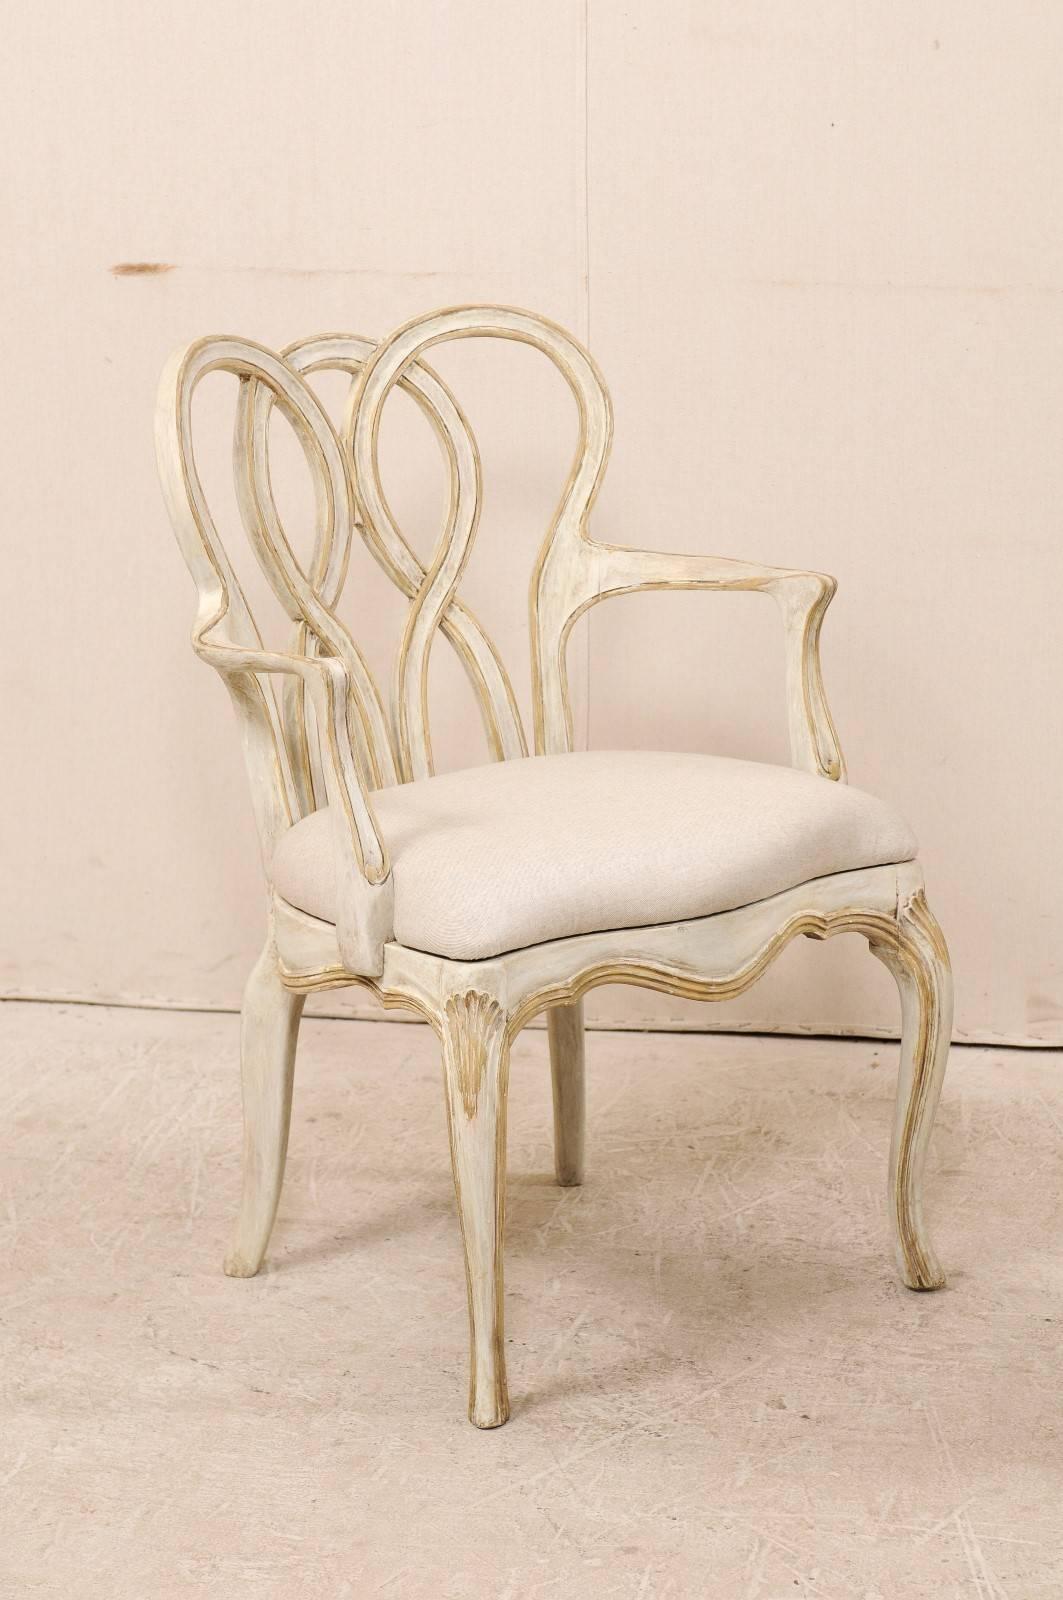 American Pair of Venetian Style Painted Wood Armchairs with Intertwined Back-Splats